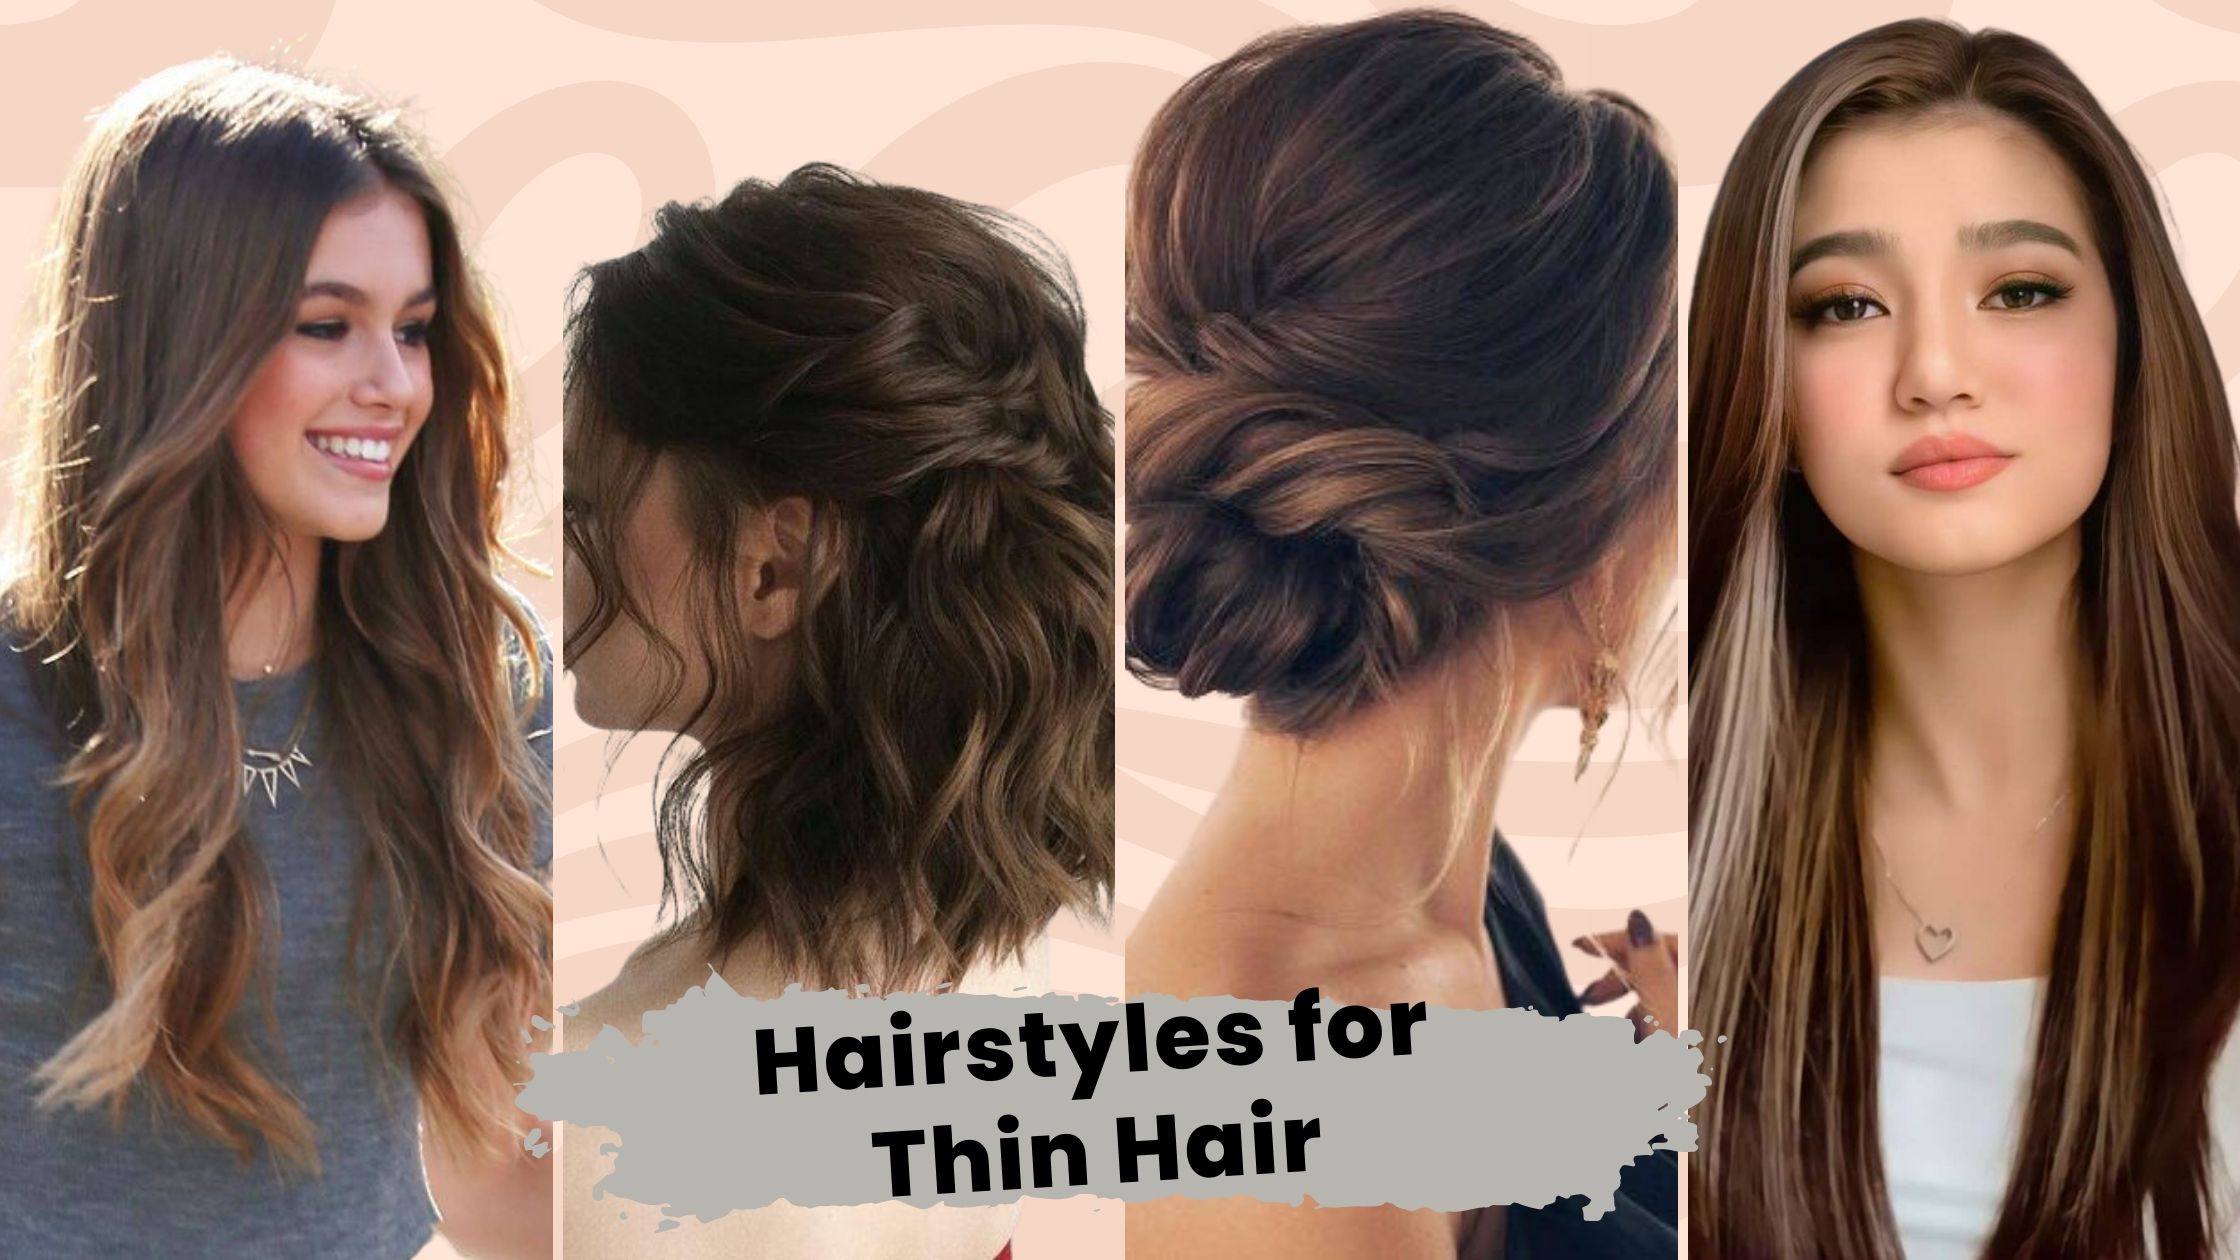 Hairstyles for Thin Hair